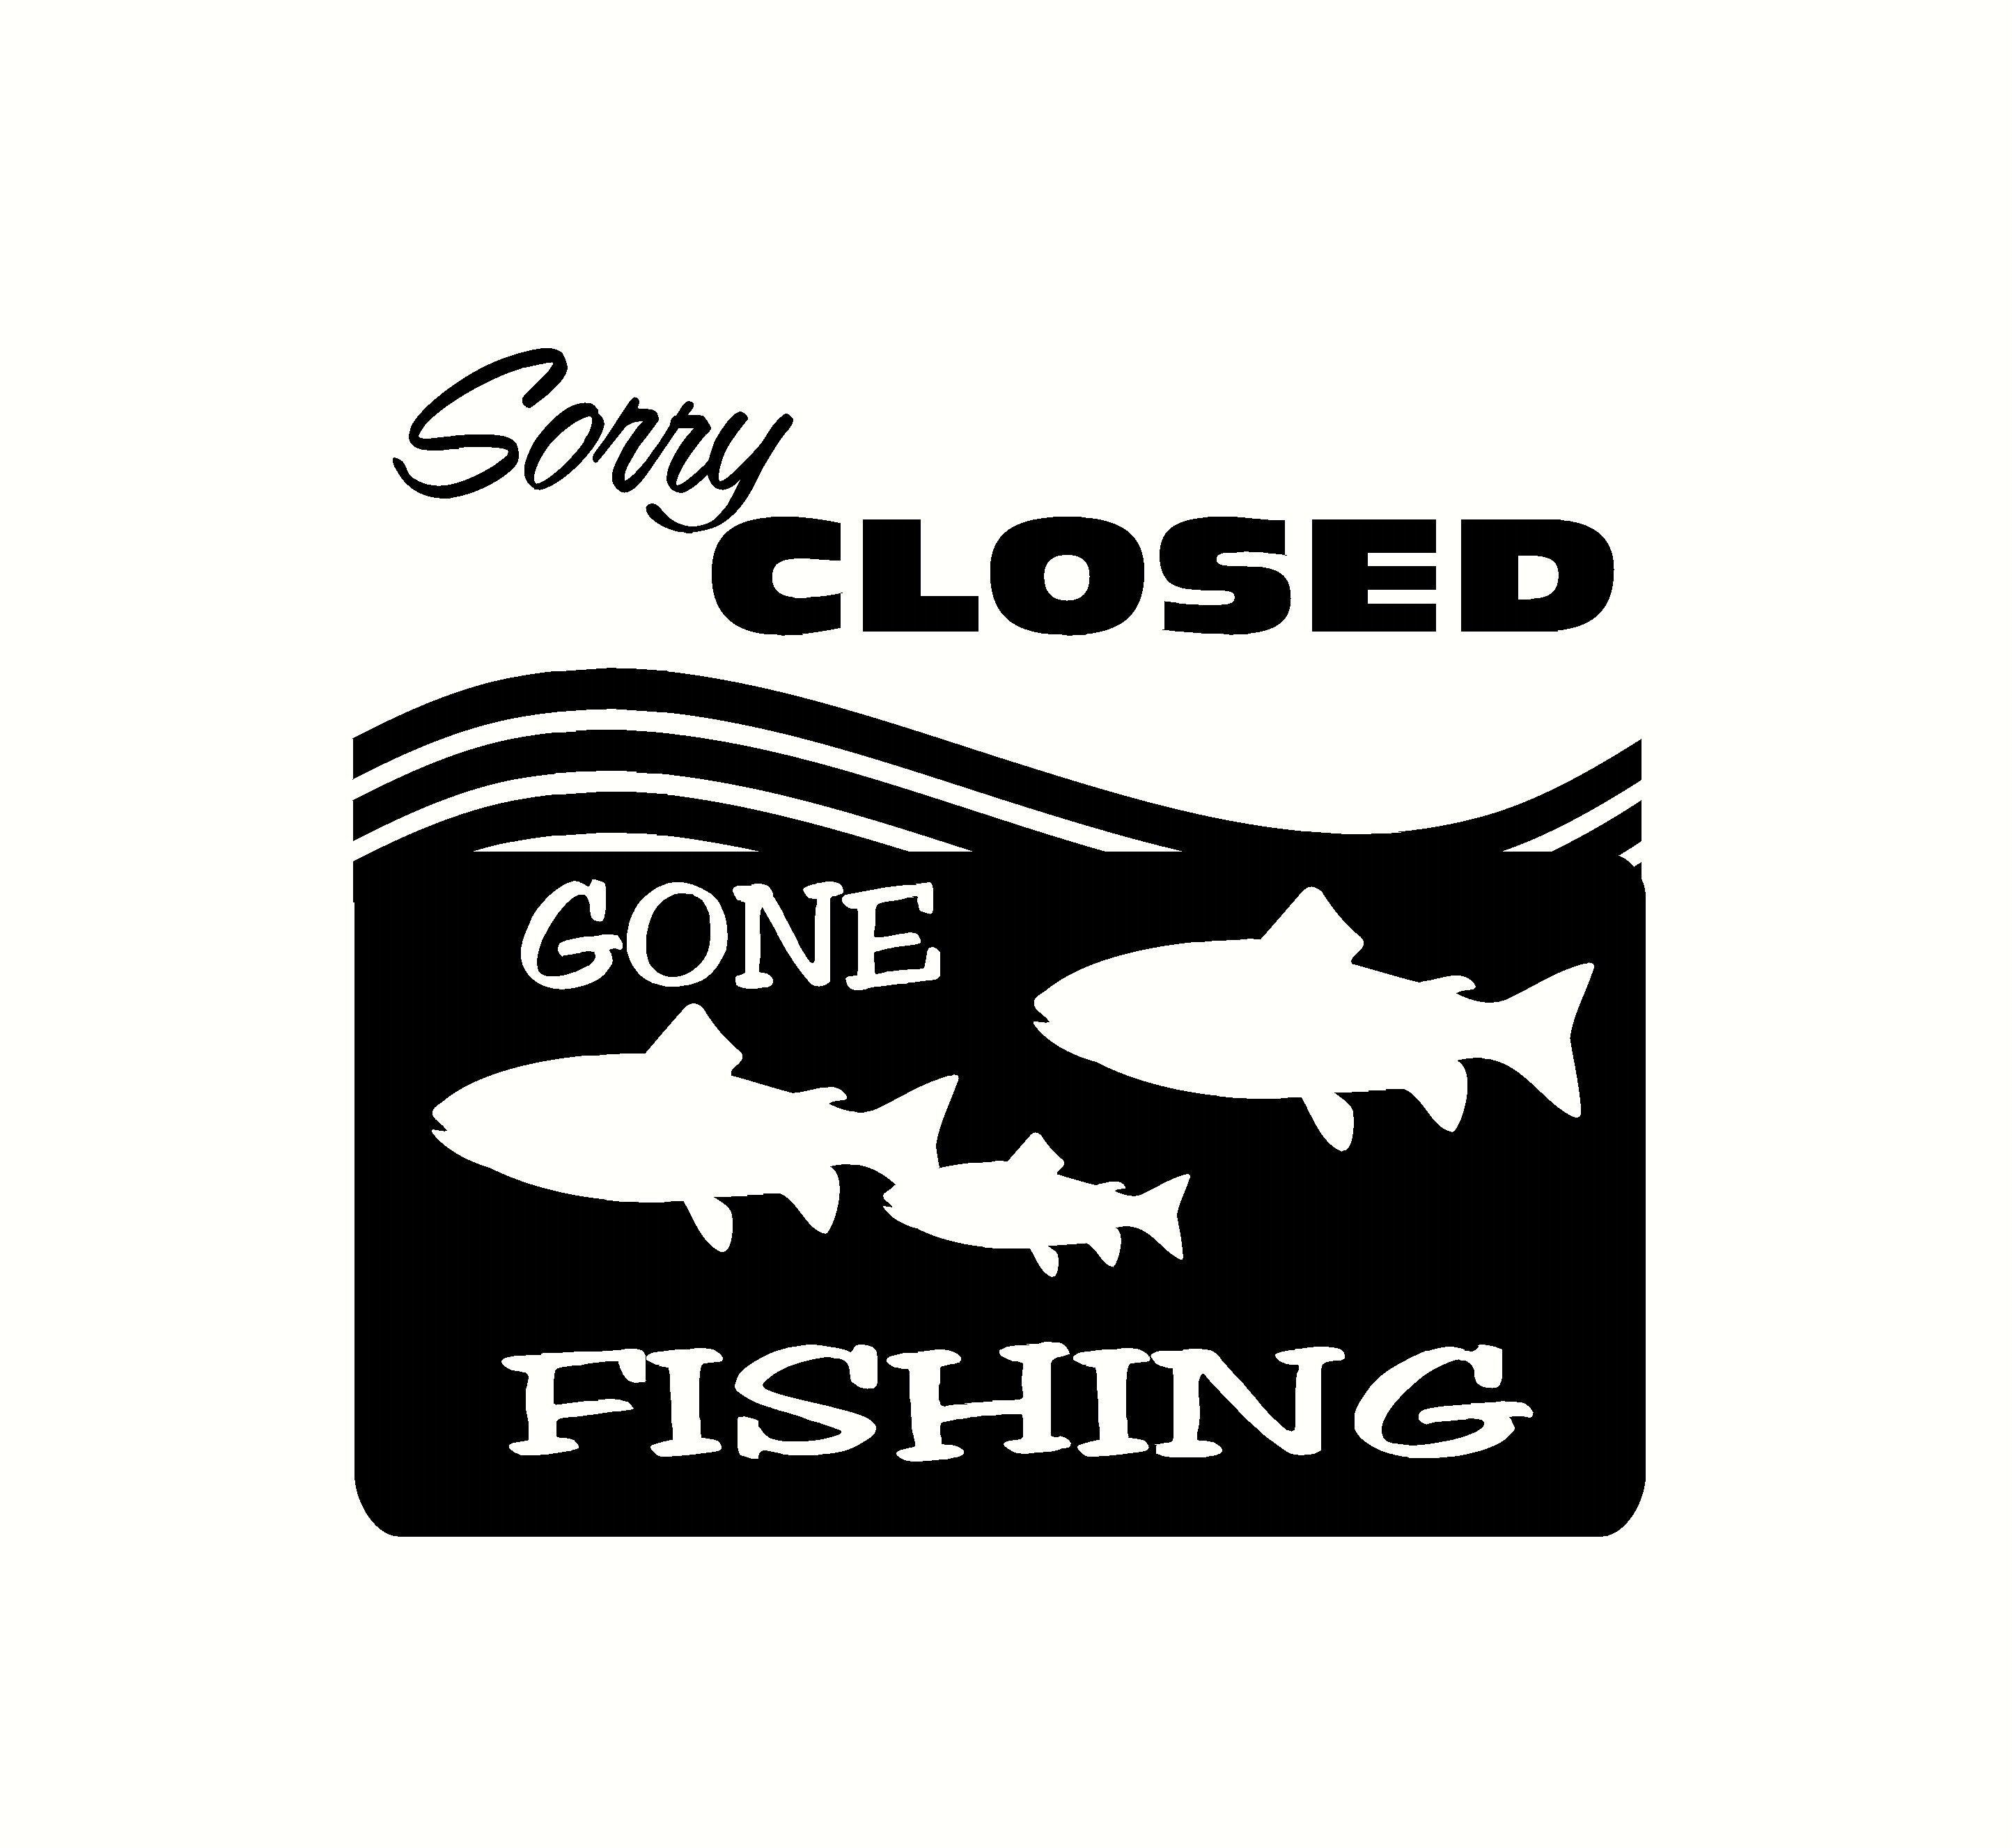 6" x 4" If You Can Read This You Are Fishing Too Close Vinyl Decal Sticker 